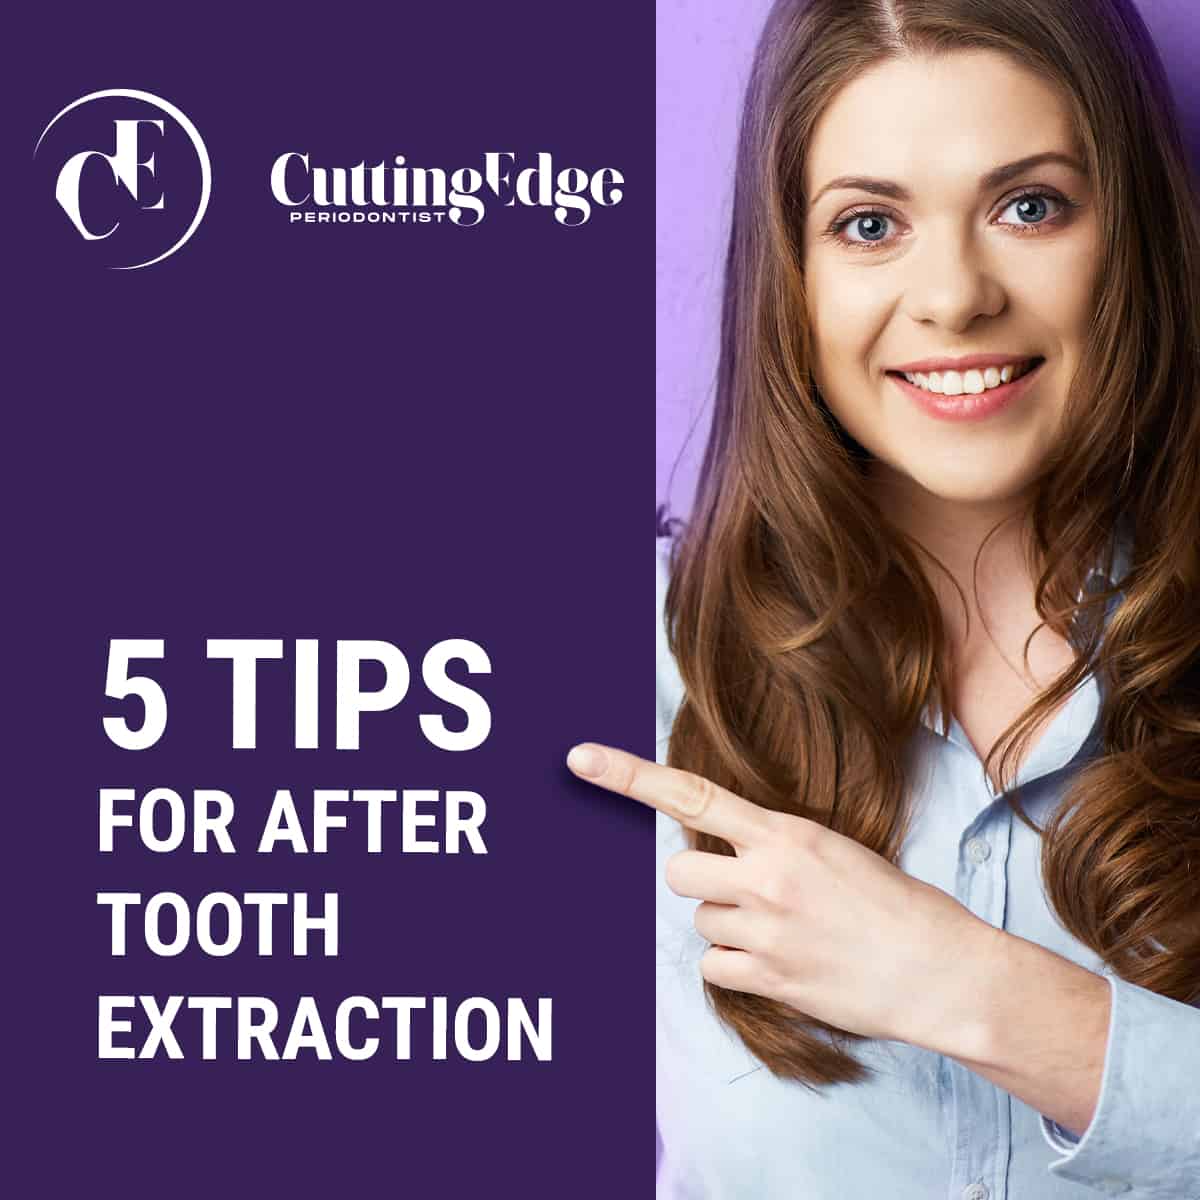 5 Tips for After A Tooth Extraction - Dr. Diana Sedler, Cutting Edge Periodontist - Burbank, CA